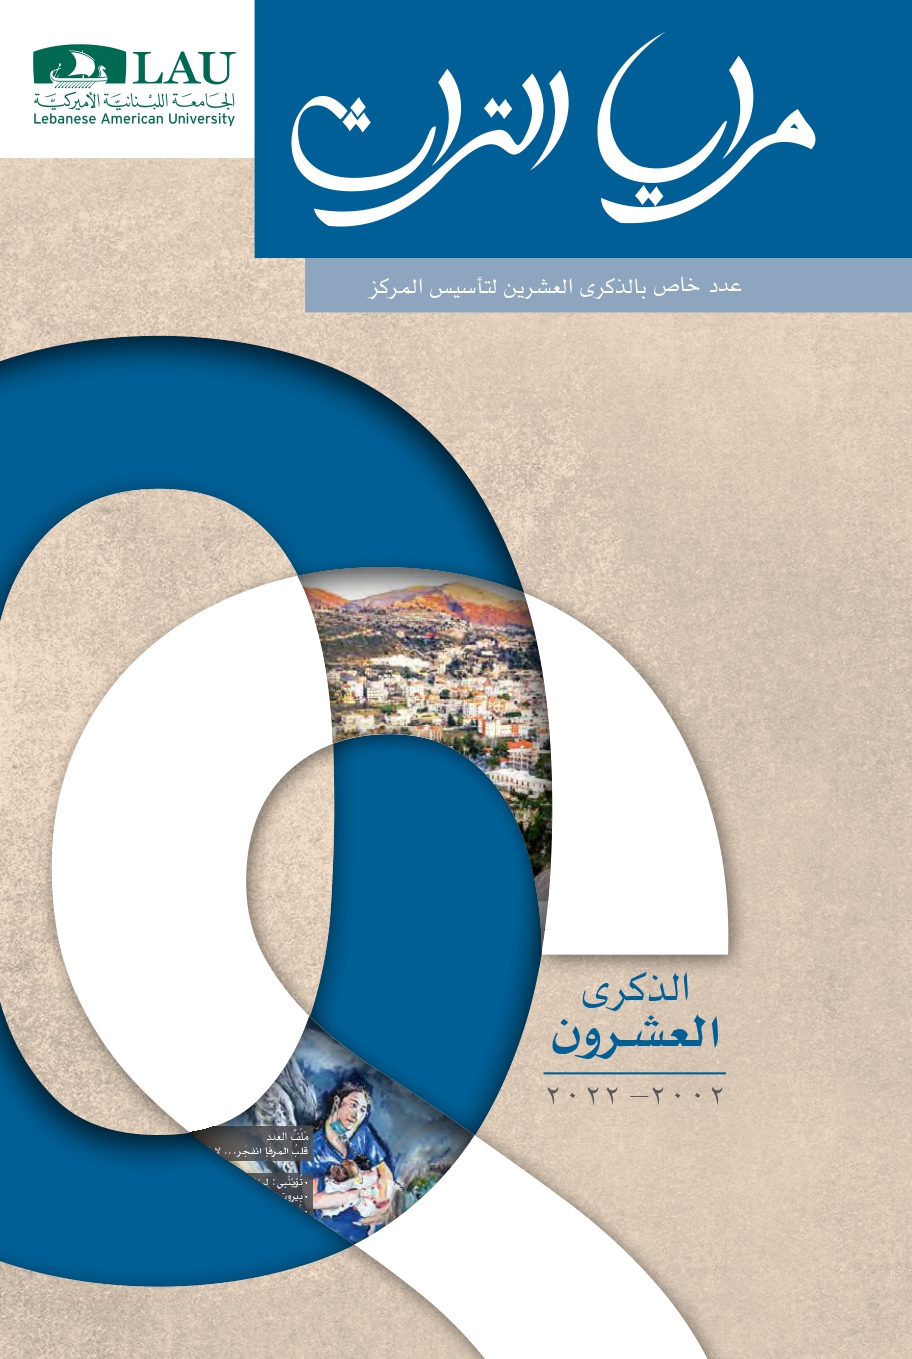 Mirrors of Heritage, Special Issue, 20th Anniversary, The Center for Lebanese Heritage, Lebanese American University (LAU), 2202-2022.